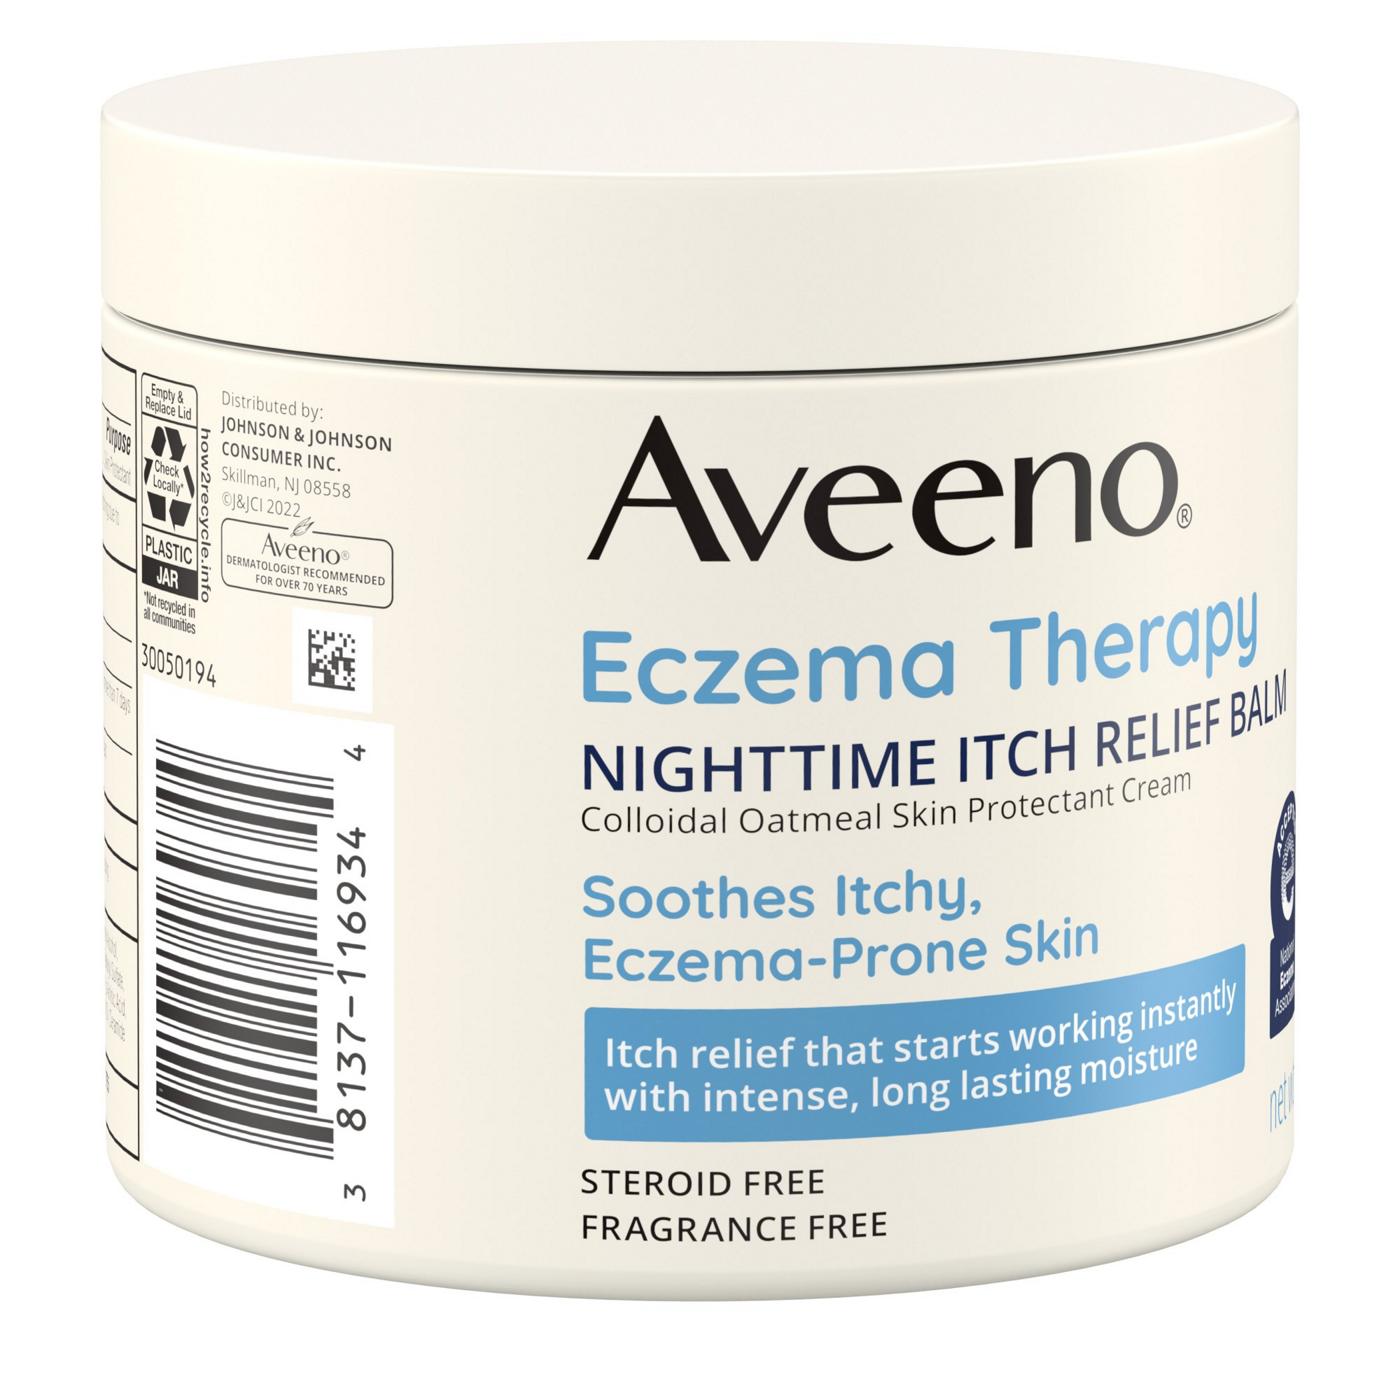 Aveeno Eczema Therapy Nighttime Itch Relief Balm; image 2 of 3